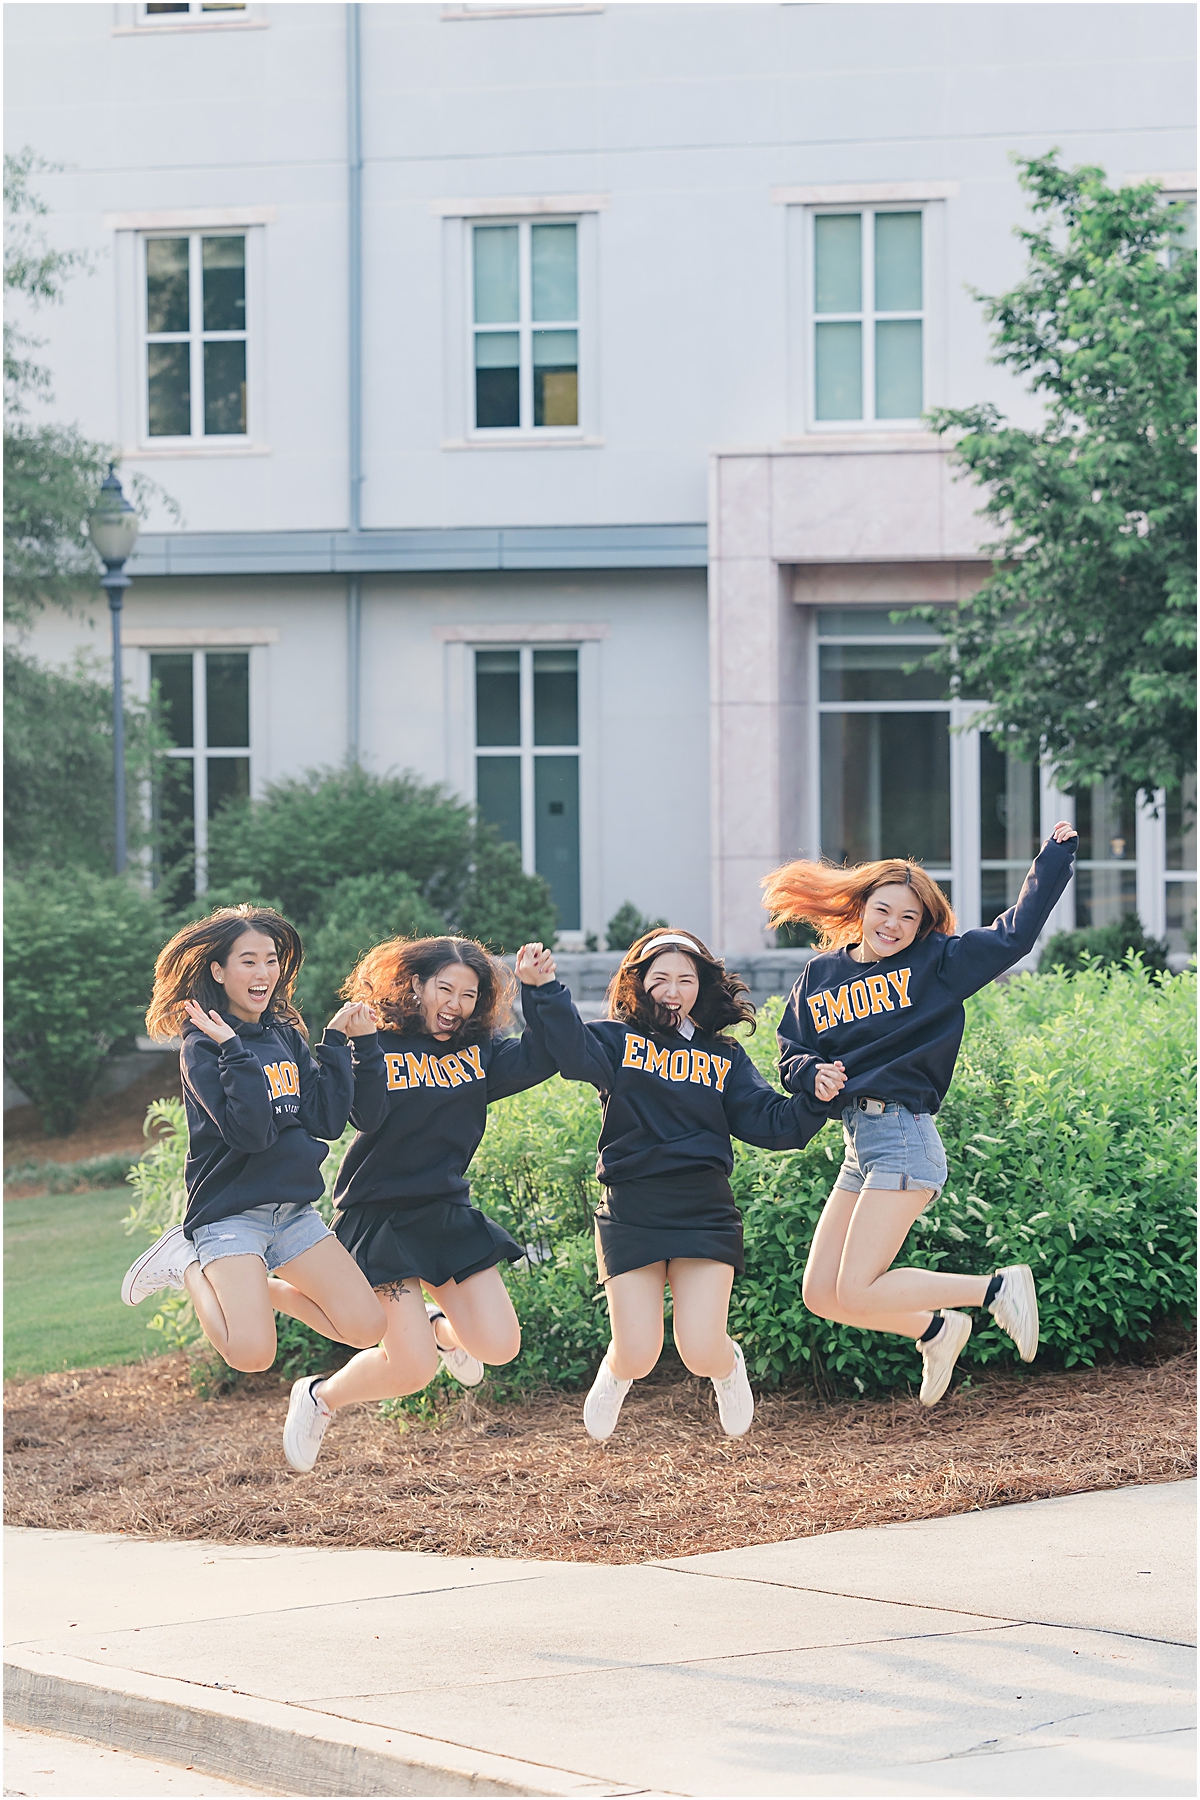 4 female graduates of Emory University in GA jumping in the air wearing matching navy blue long sleeve t-shirts that say "Emory" in block letters in gold with white outlines